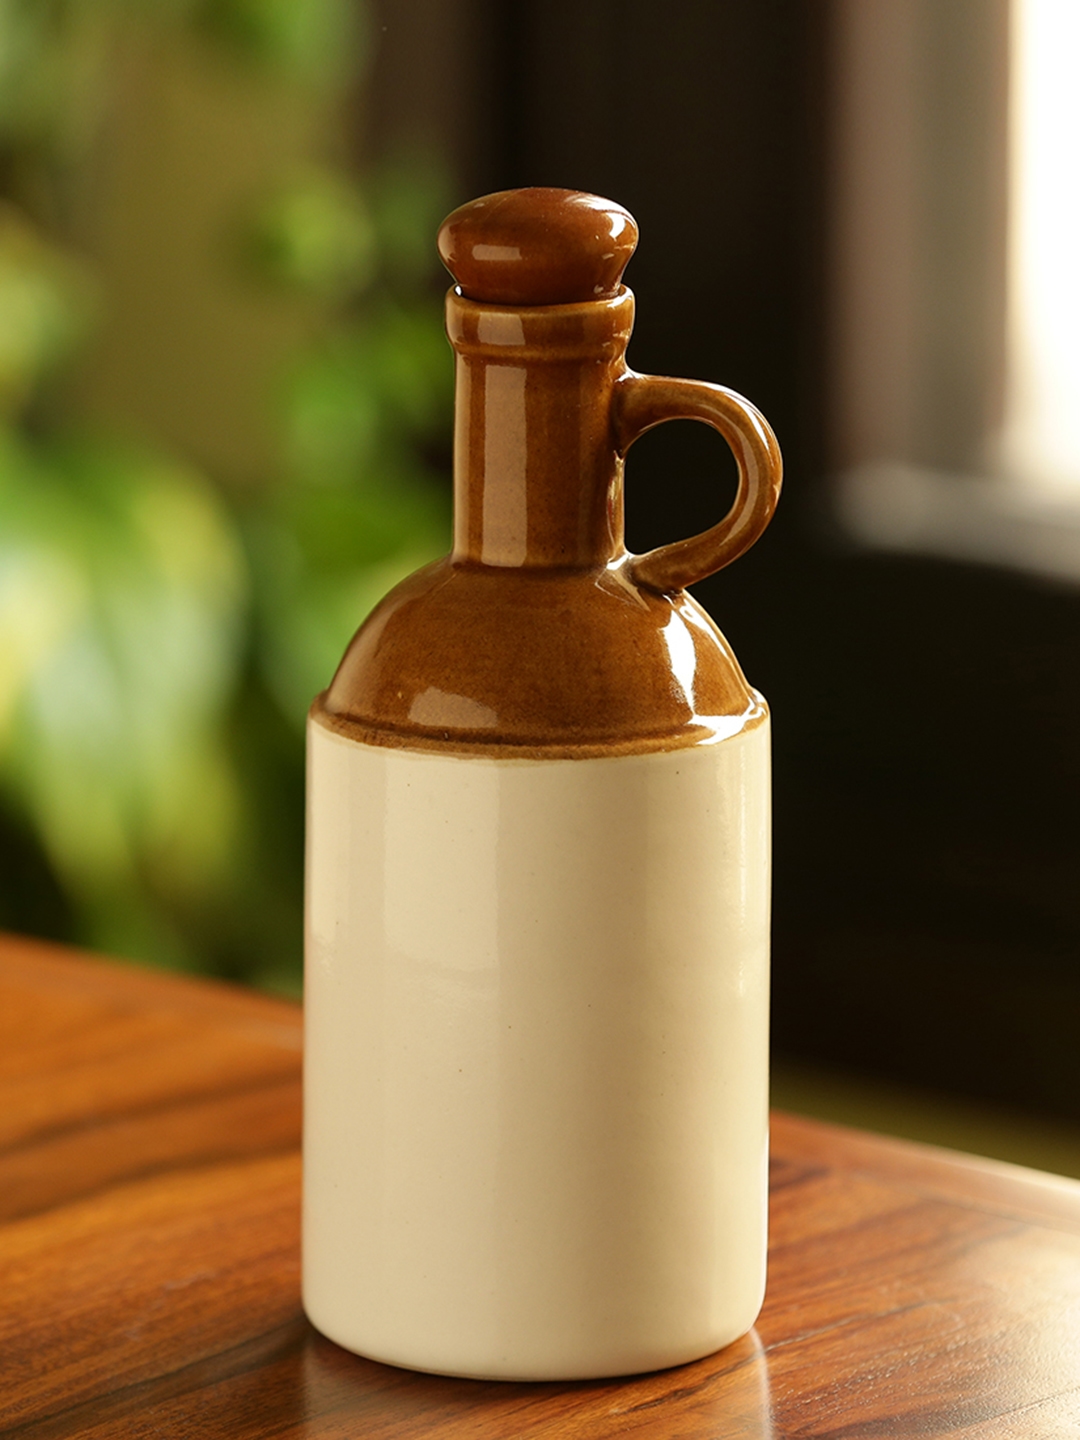 ExclusiveLane Brown & Off-White Old Fashioned Hand Glazed Pottery Ceramic Oil Bottle